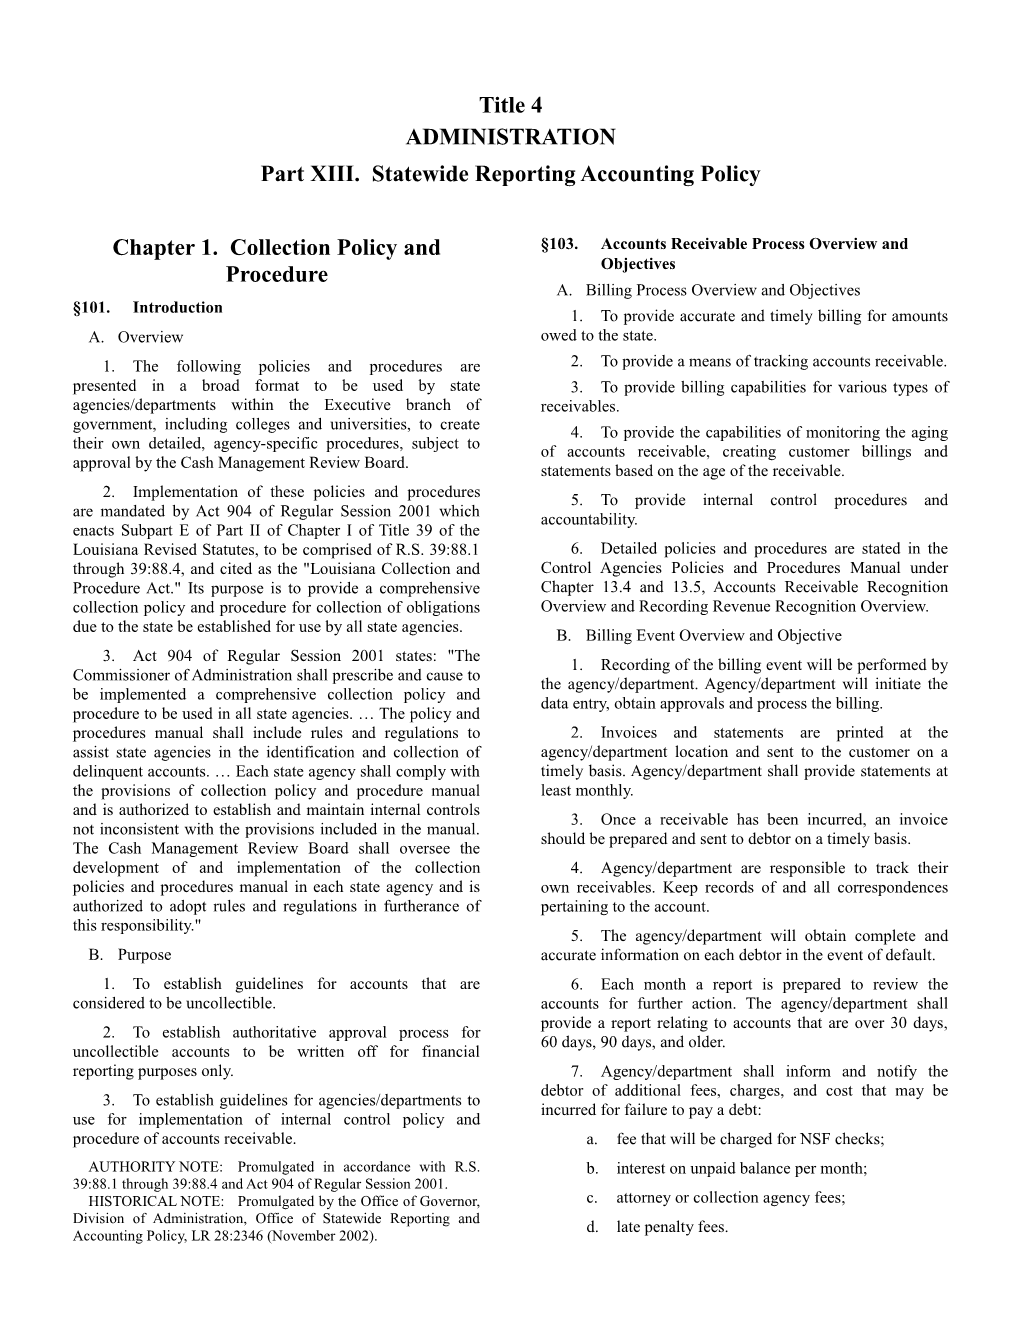 Part XIII. Statewide Reporting Accounting Policy